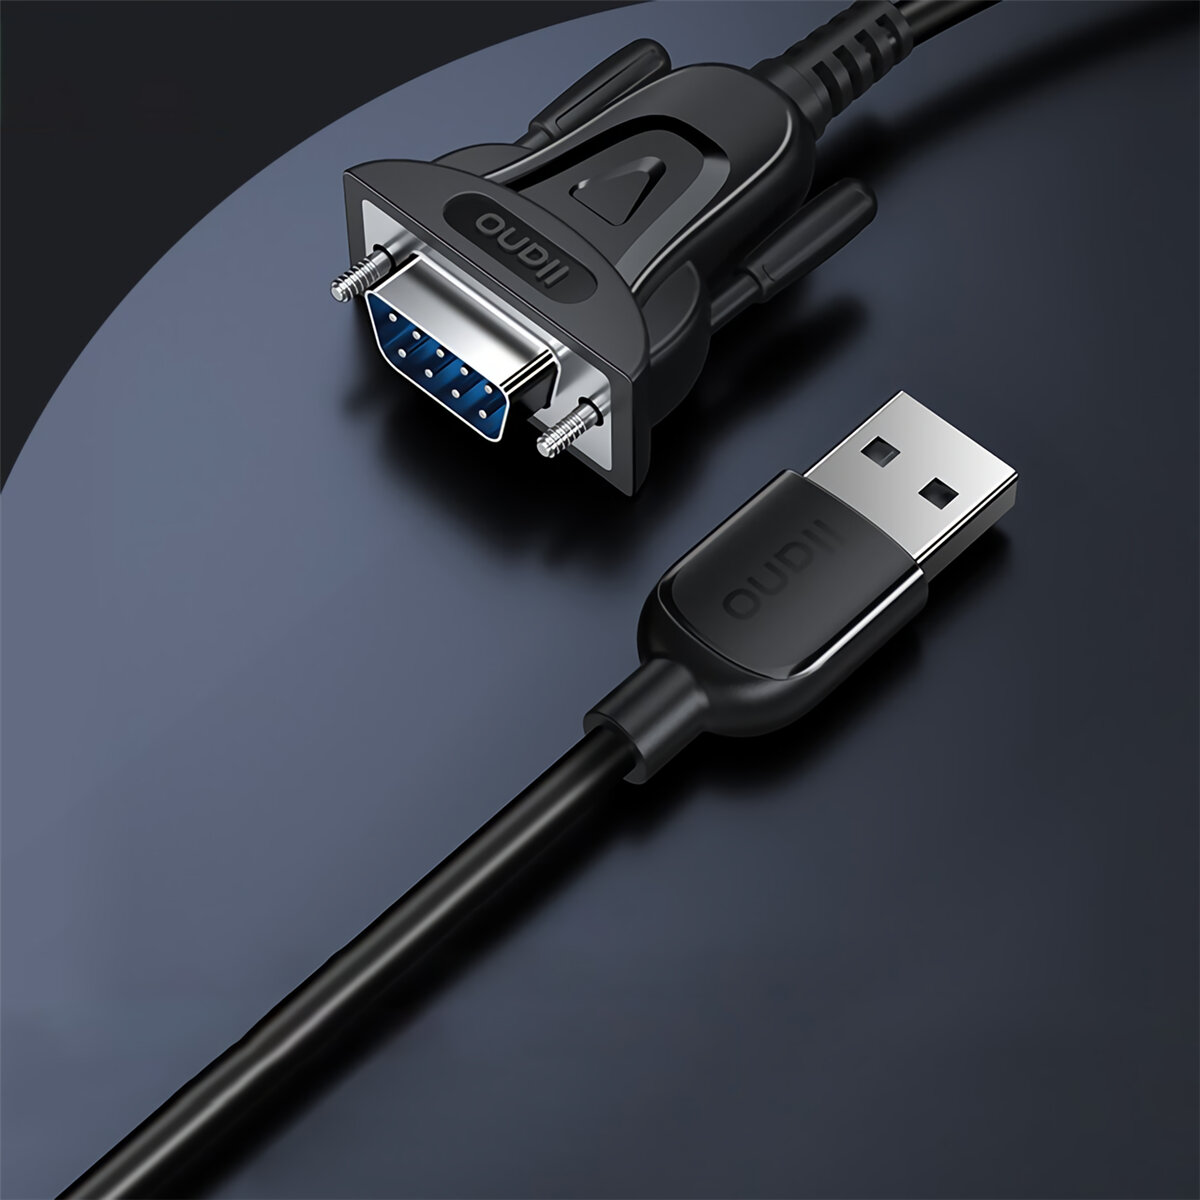 llano USB to RS232 Serial Cable USB to DB 9Pin Cable Adapter PL2303 Chipfor Windows 7 8.1 XP Vista f